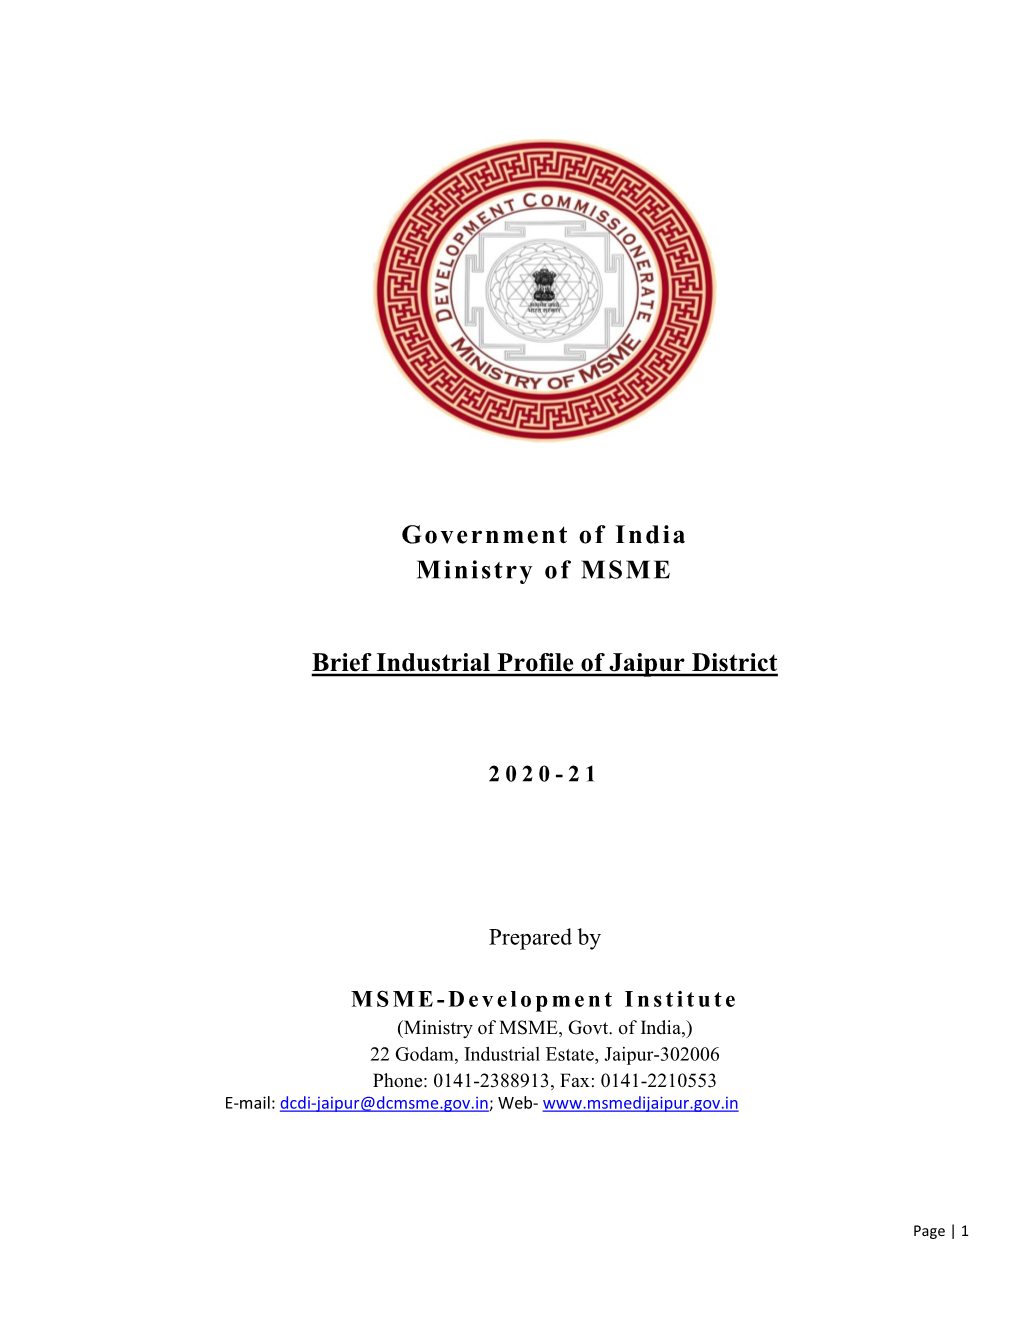 Government of India Ministry of MSME Brief Industrial Profile of Jaipur